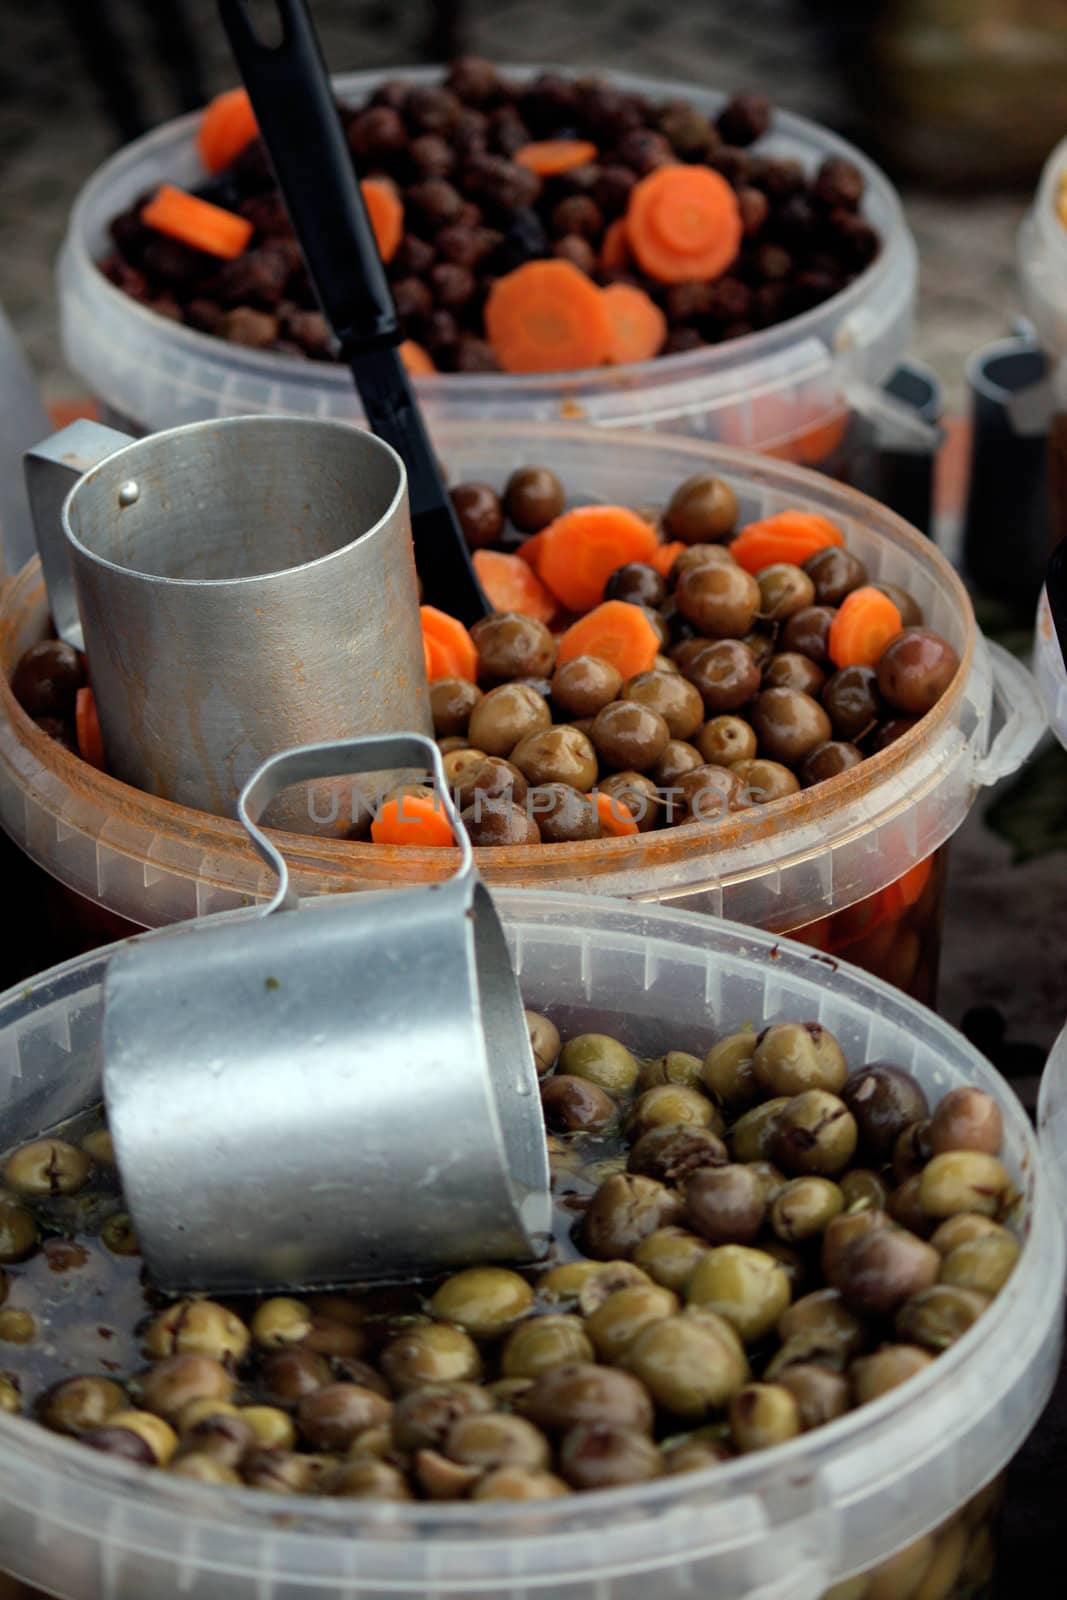 Containers of olives by membio